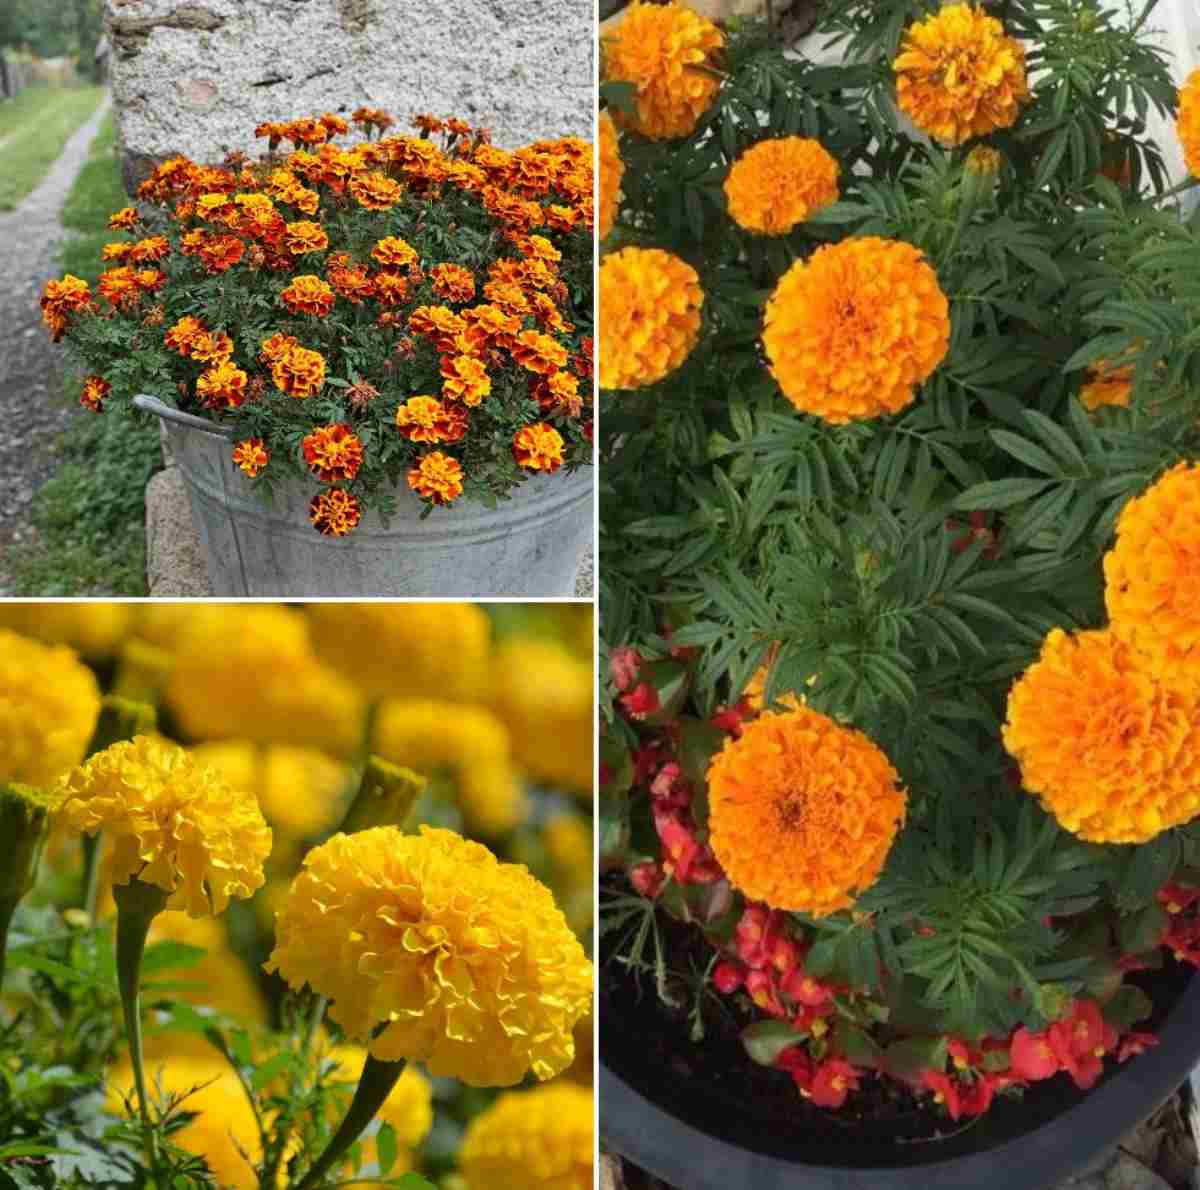 Questions about growing Marigolds.